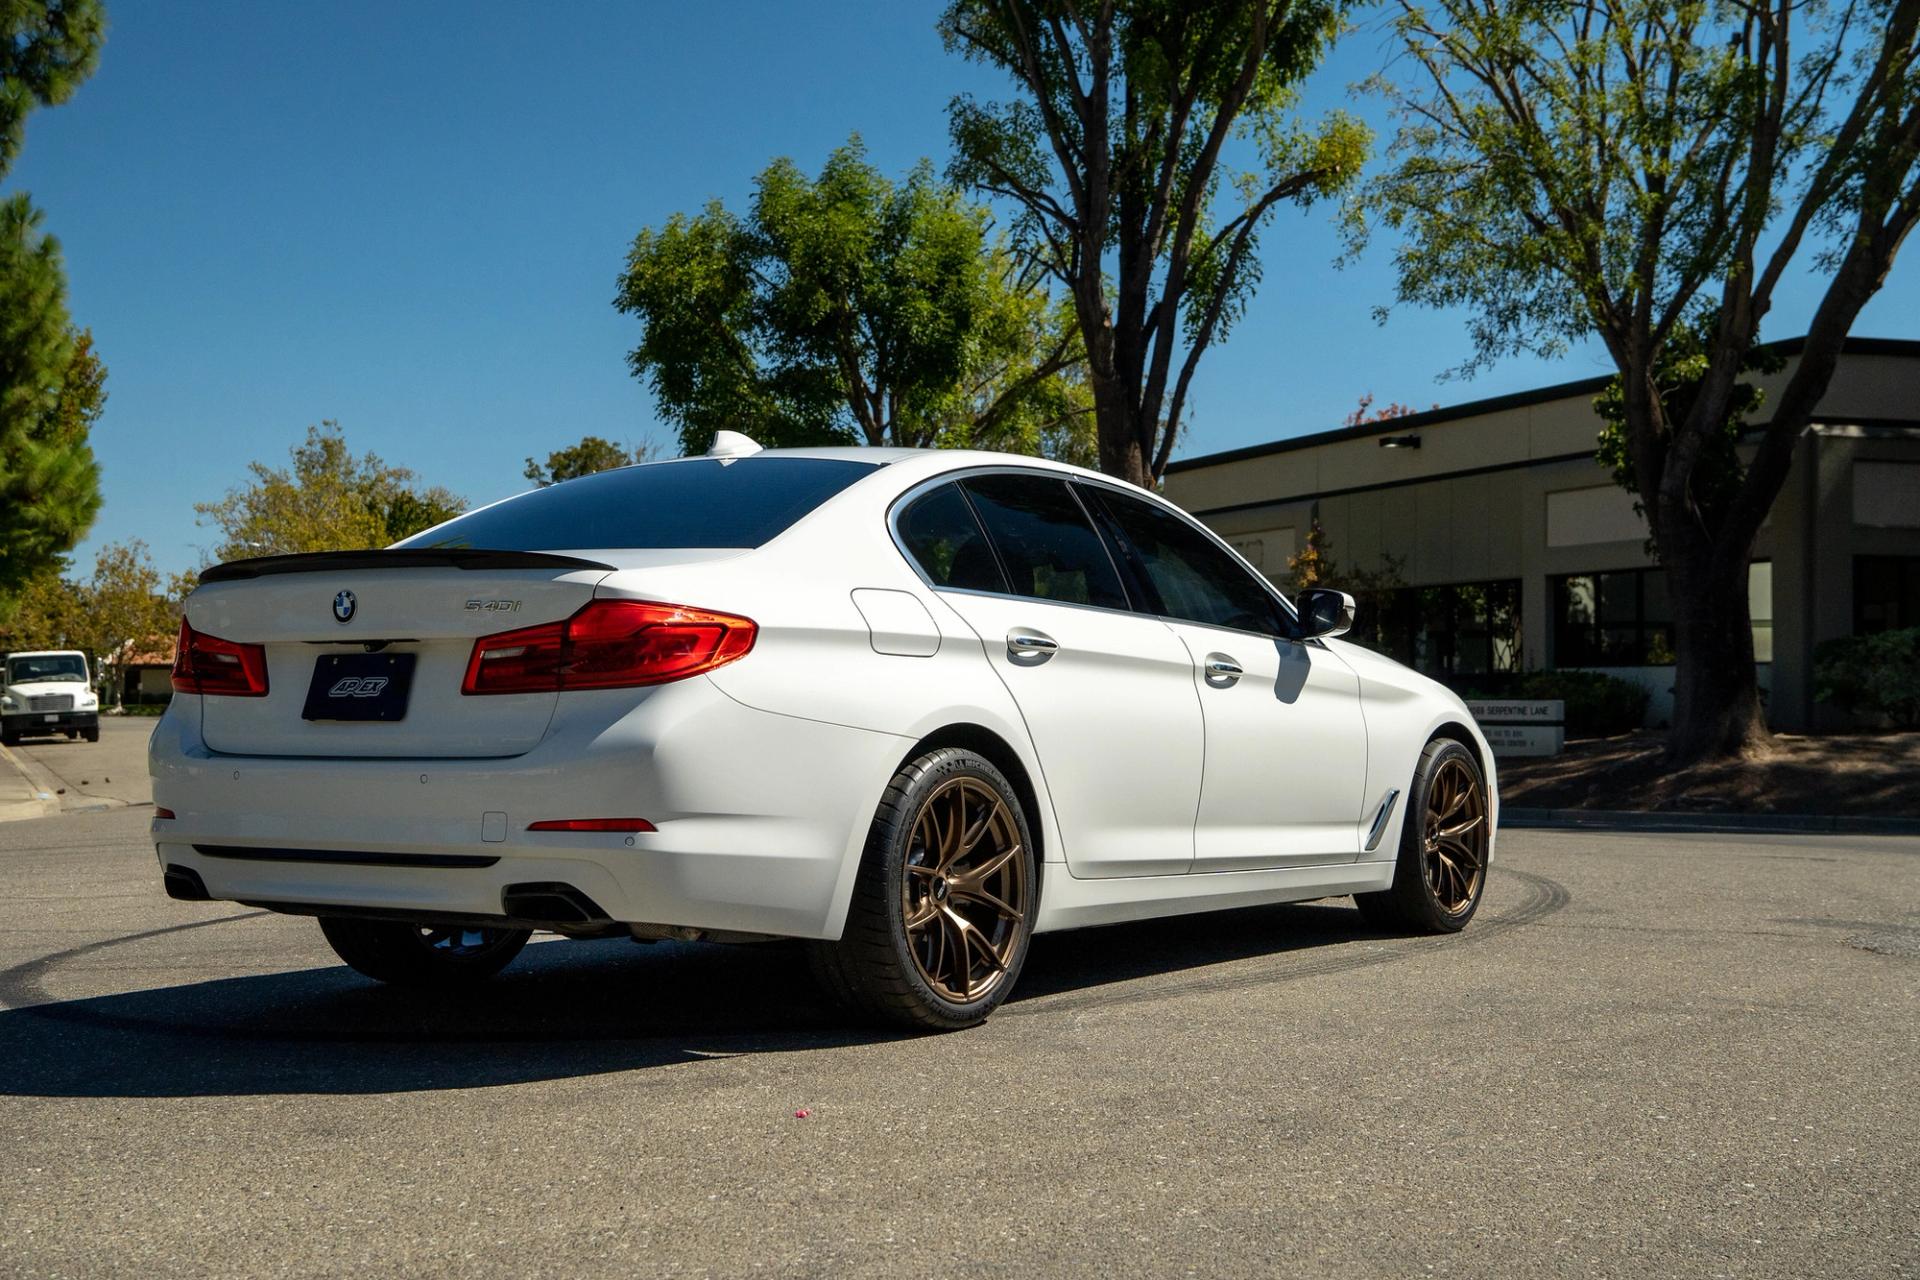 Explore the Exciting BMW G31 540i Touring